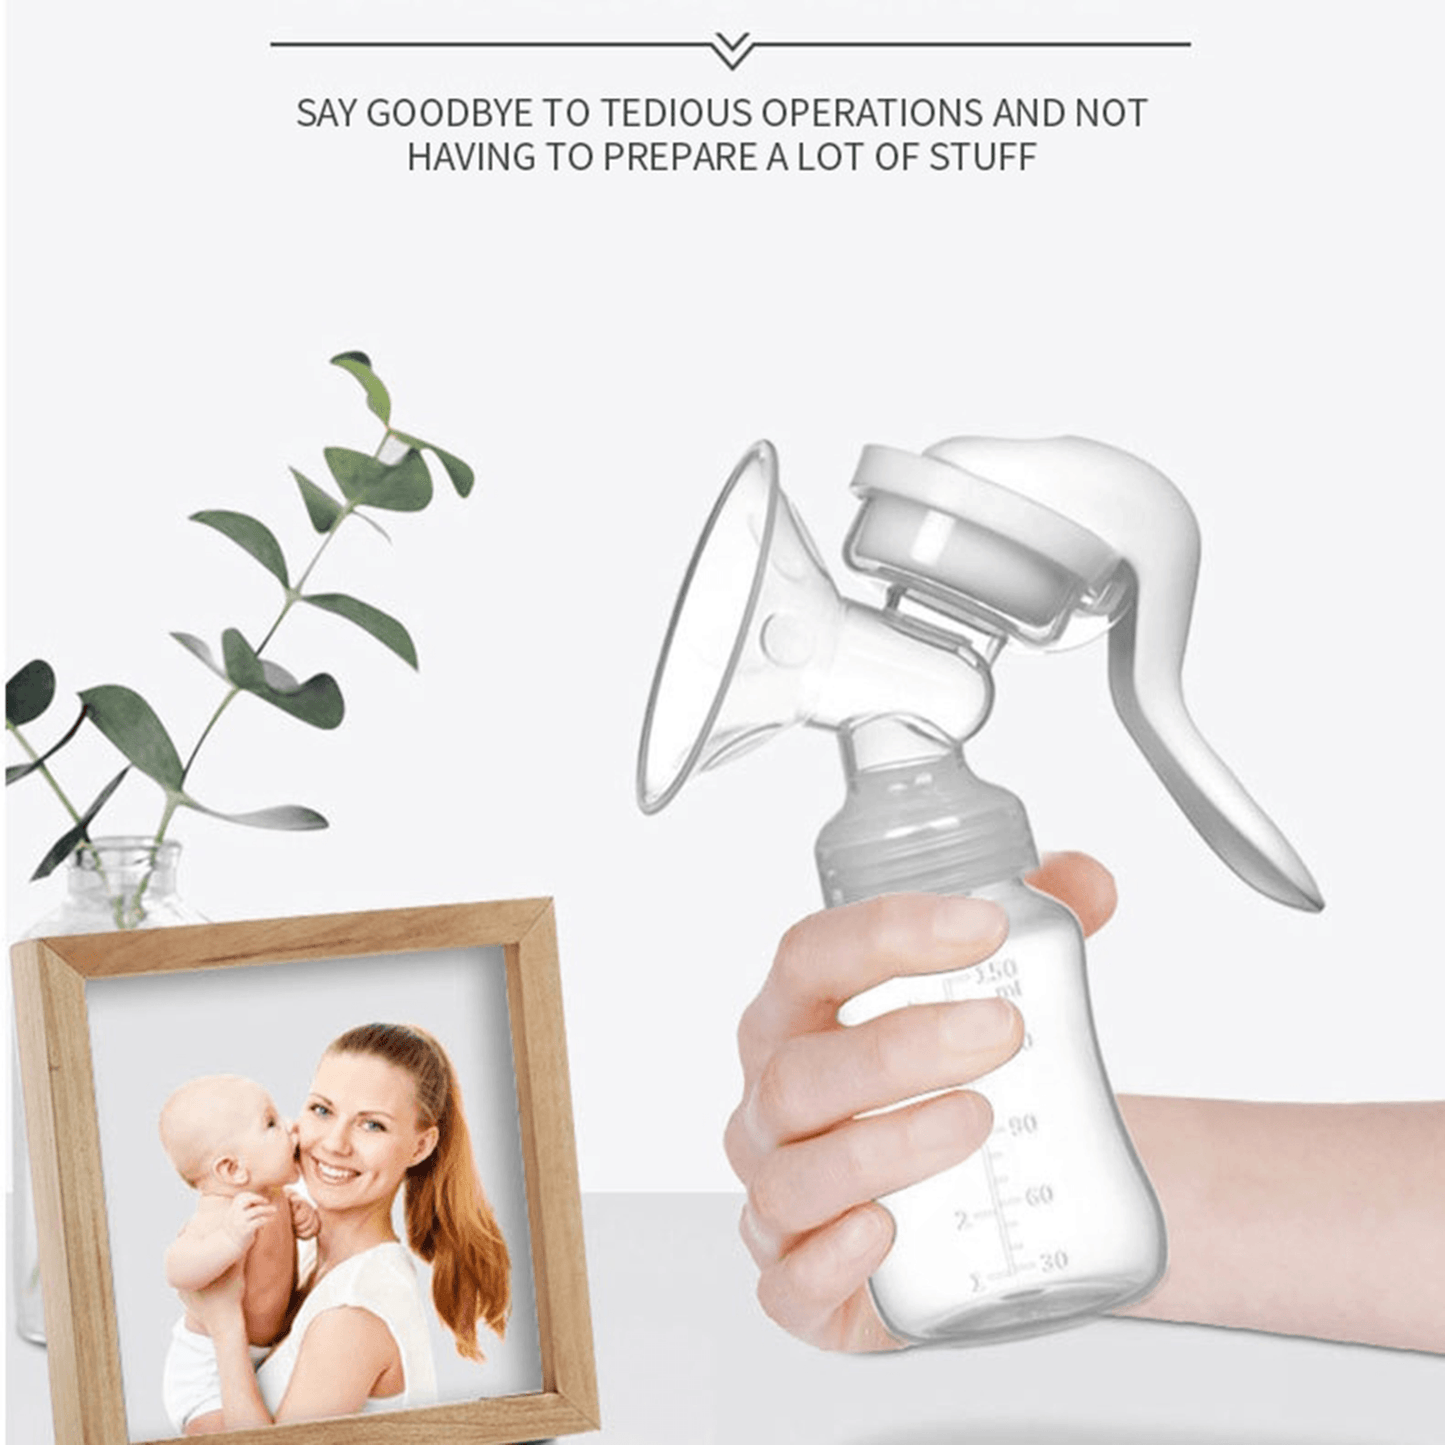 Portable Manual Breast Pump, Silicone Manual Milk Breast Pump with baby bottle ( Single ), Hand Pump for Breastfeeding Rh-188 - Nakson